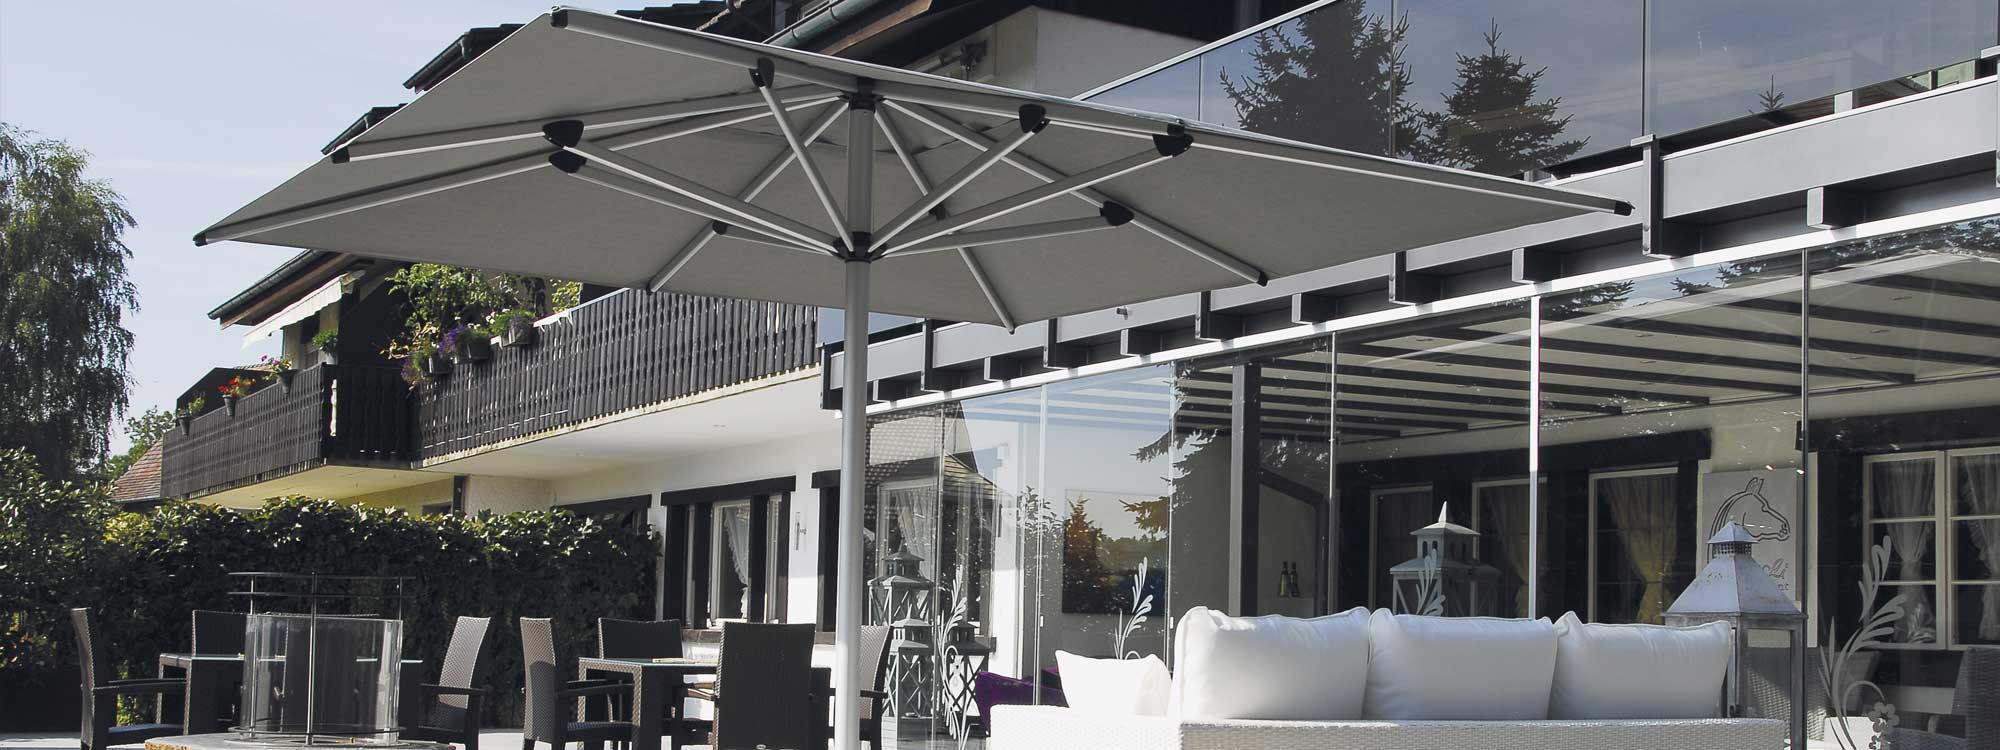 Astral large mast parasol is a modern aluminium parasol in marine-grade parasol materials by Shademaker high quality parasol company.